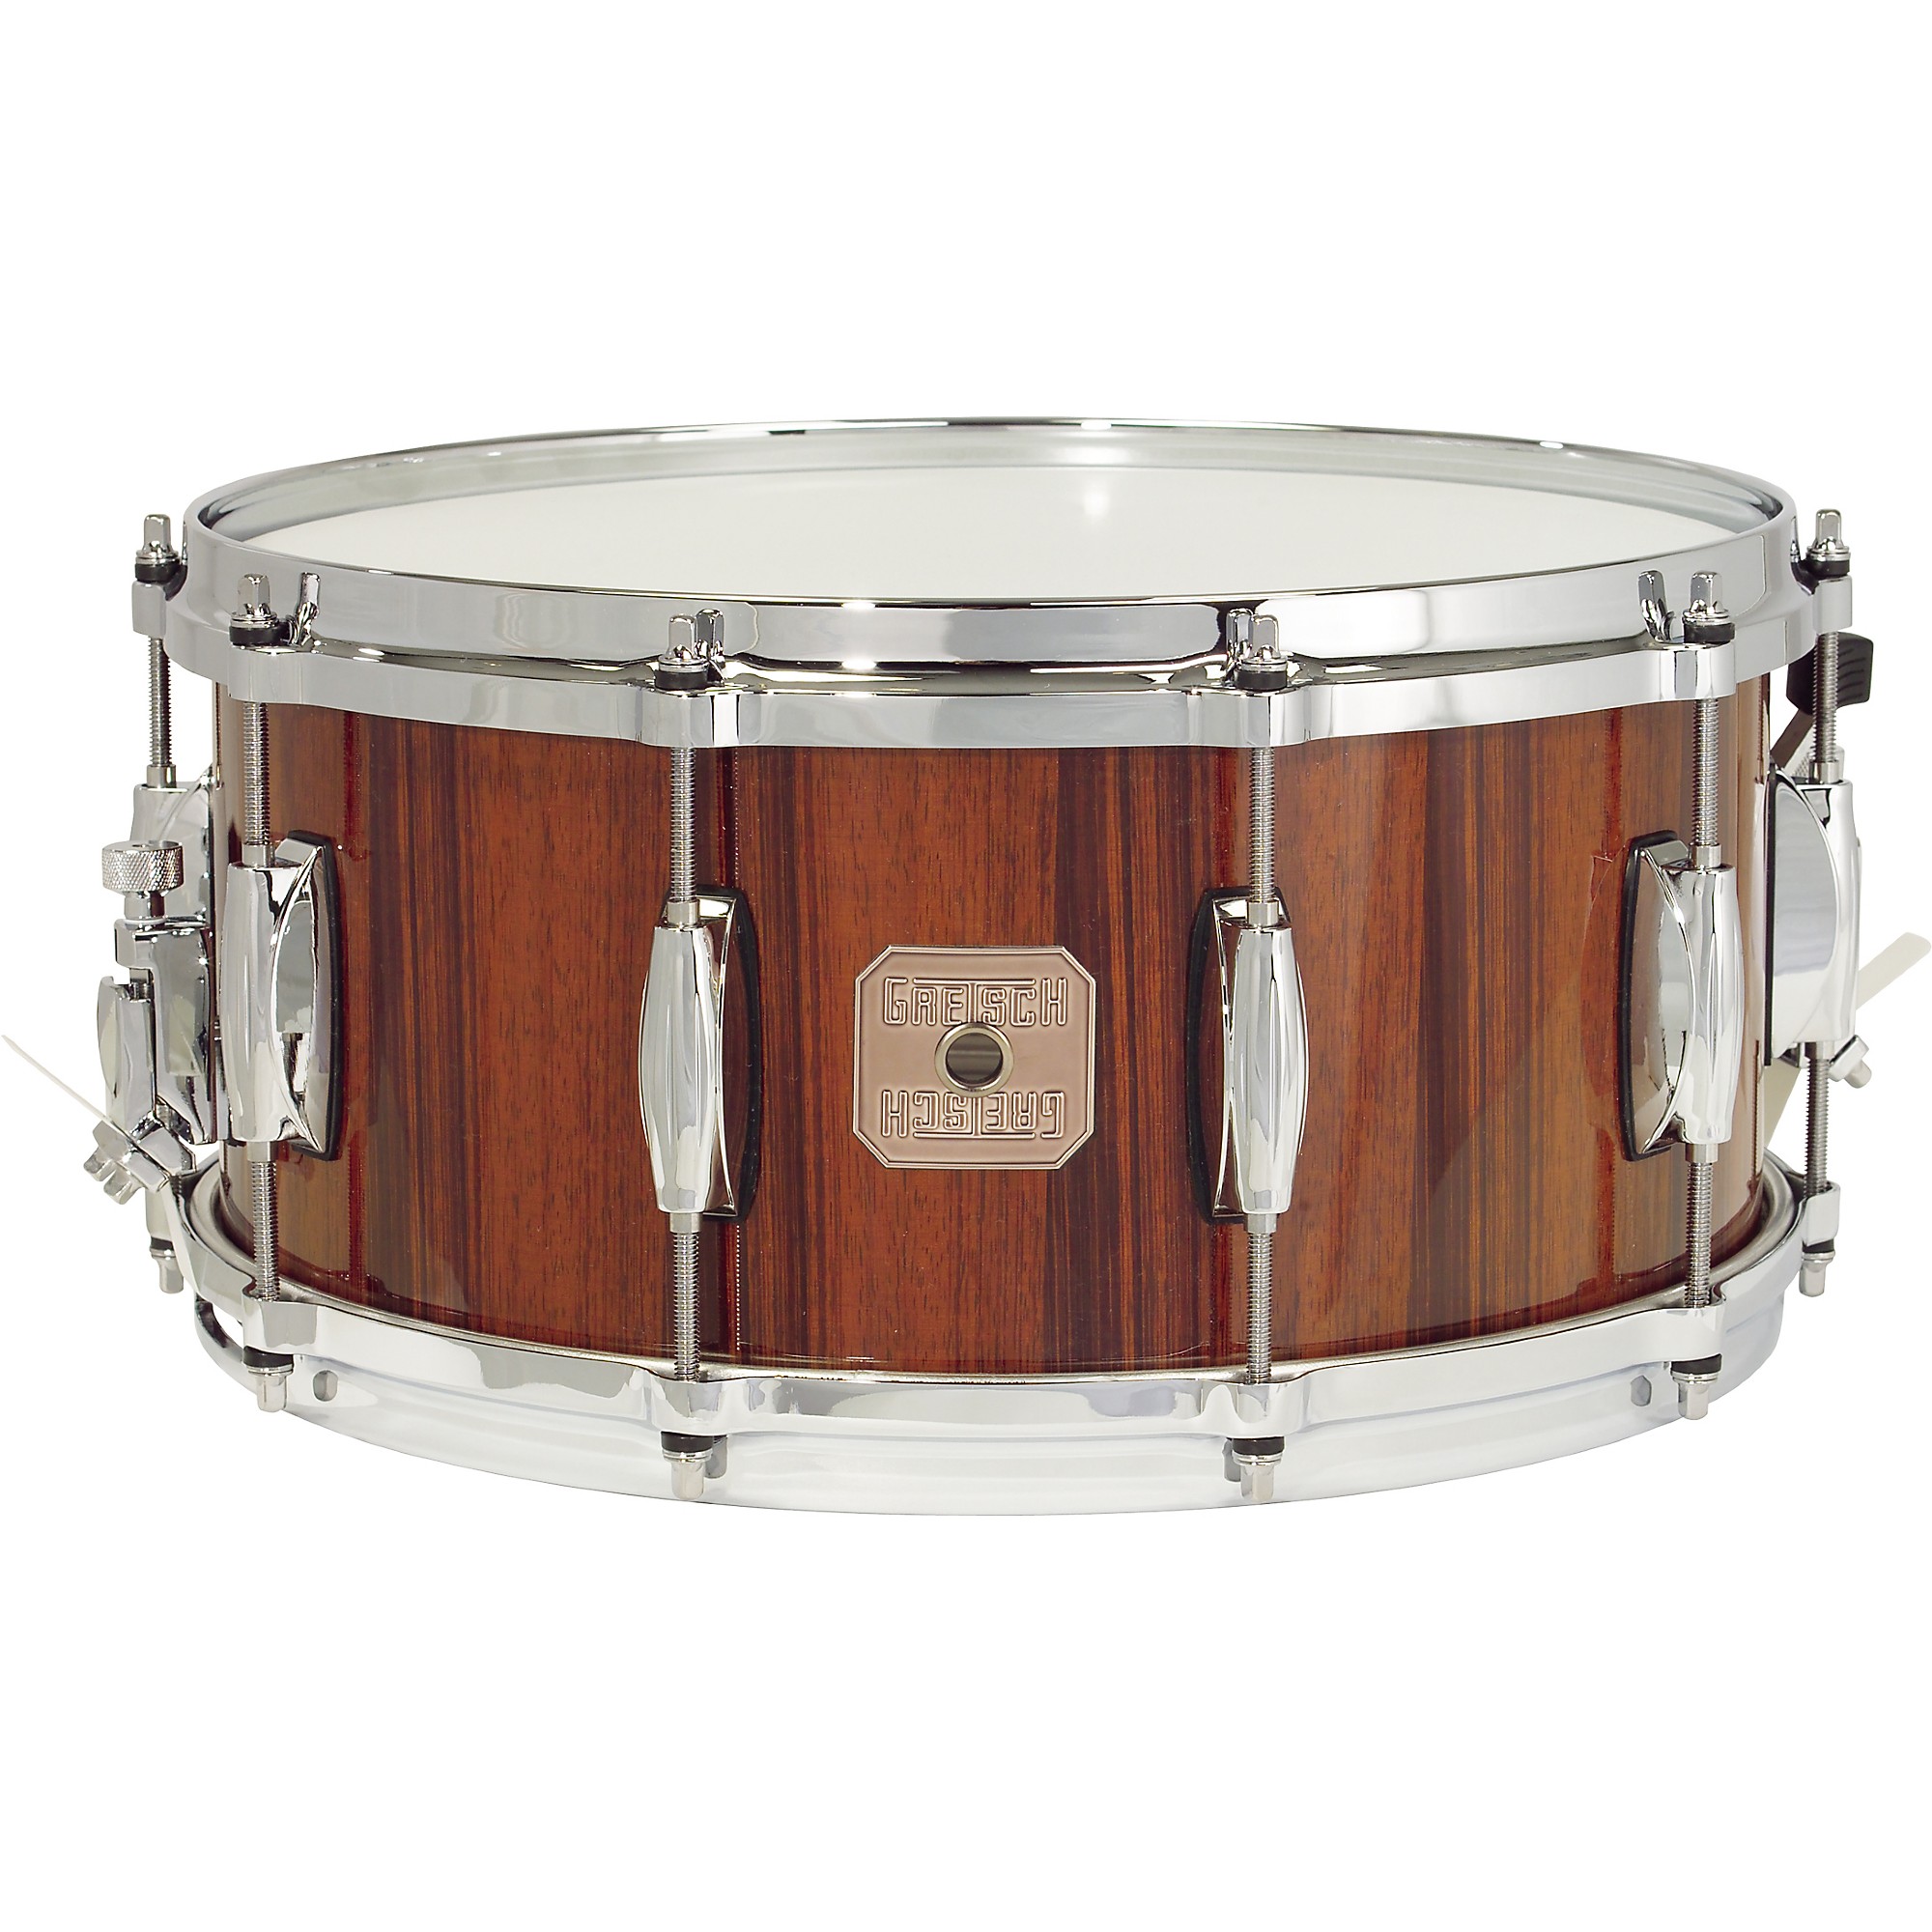 Gretsch Drums Full Range Rosewood Snare Drum 14 x 6.5 in. Natural